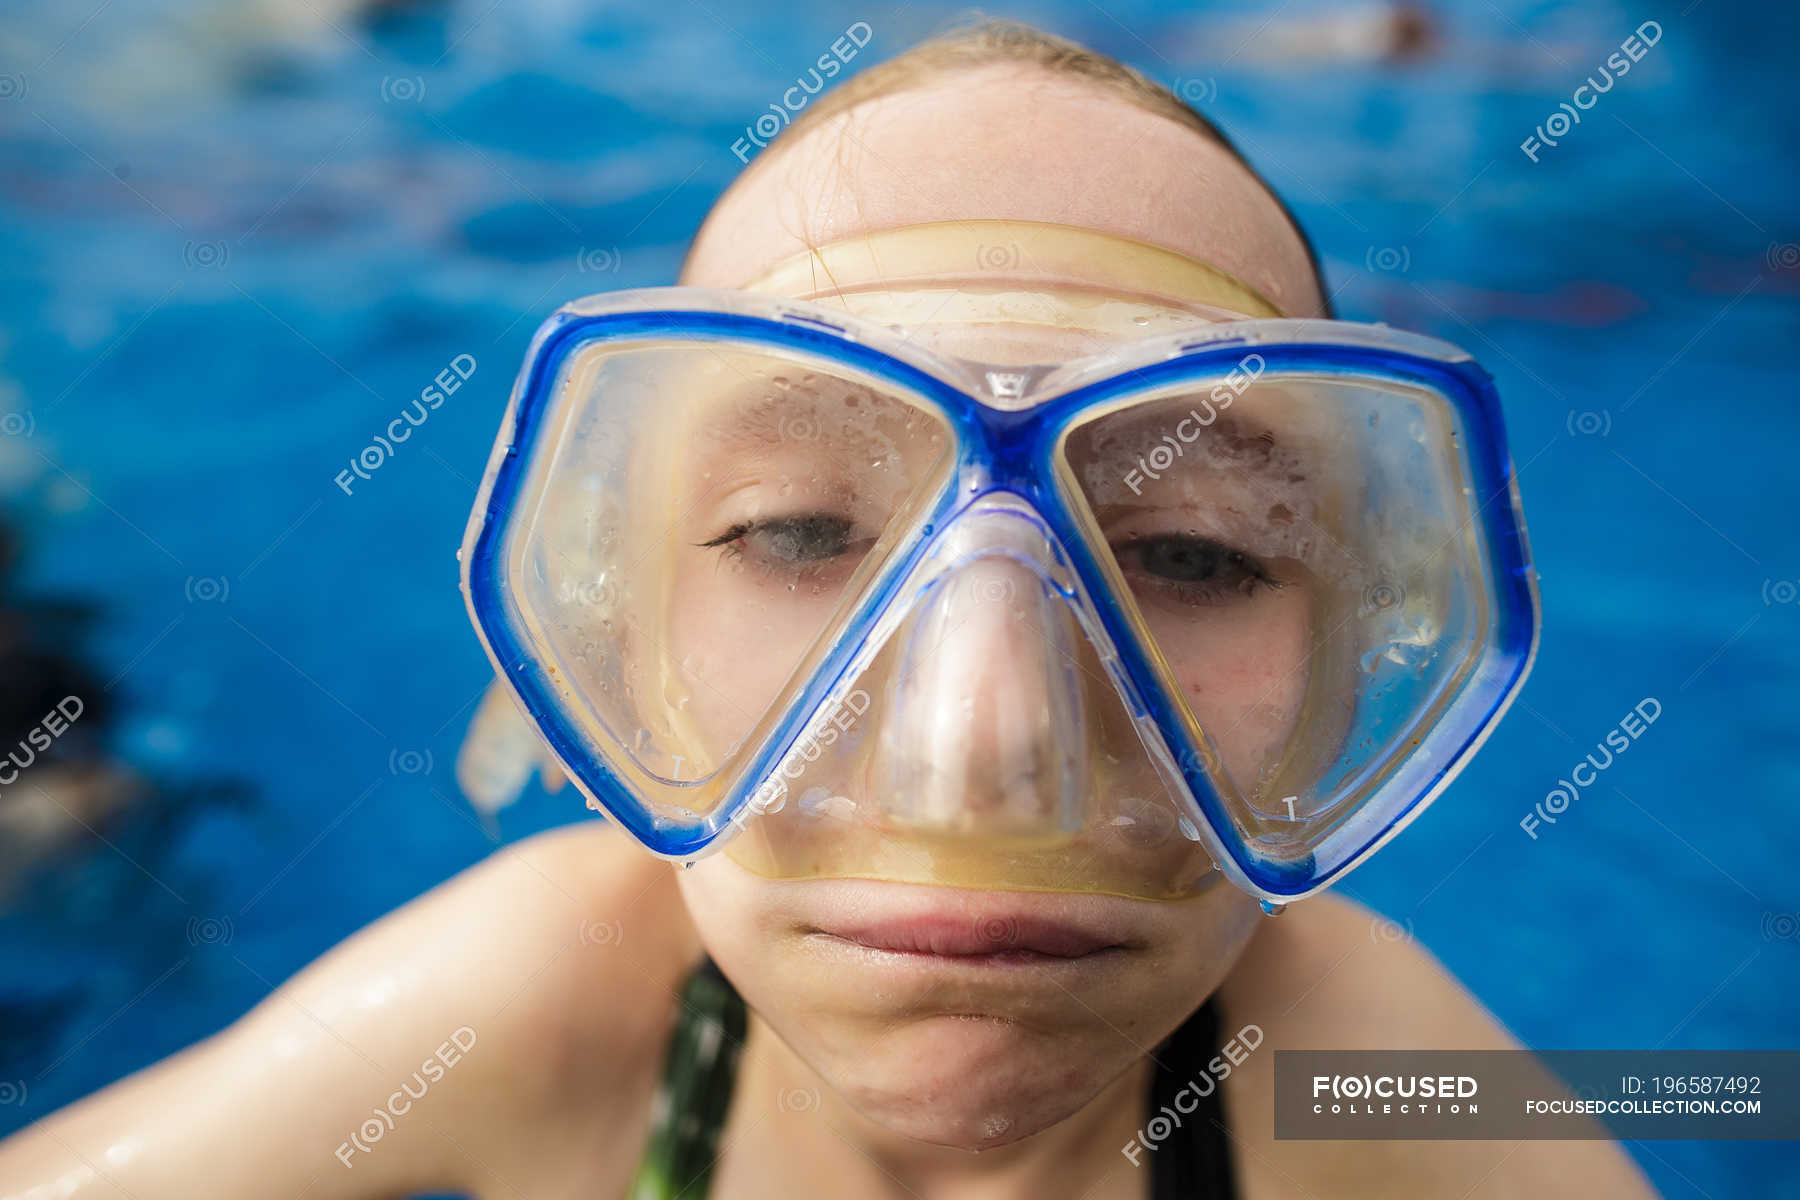 A girl in swimming pool wearing goggles and making a funny face. — - Stock | #196587492